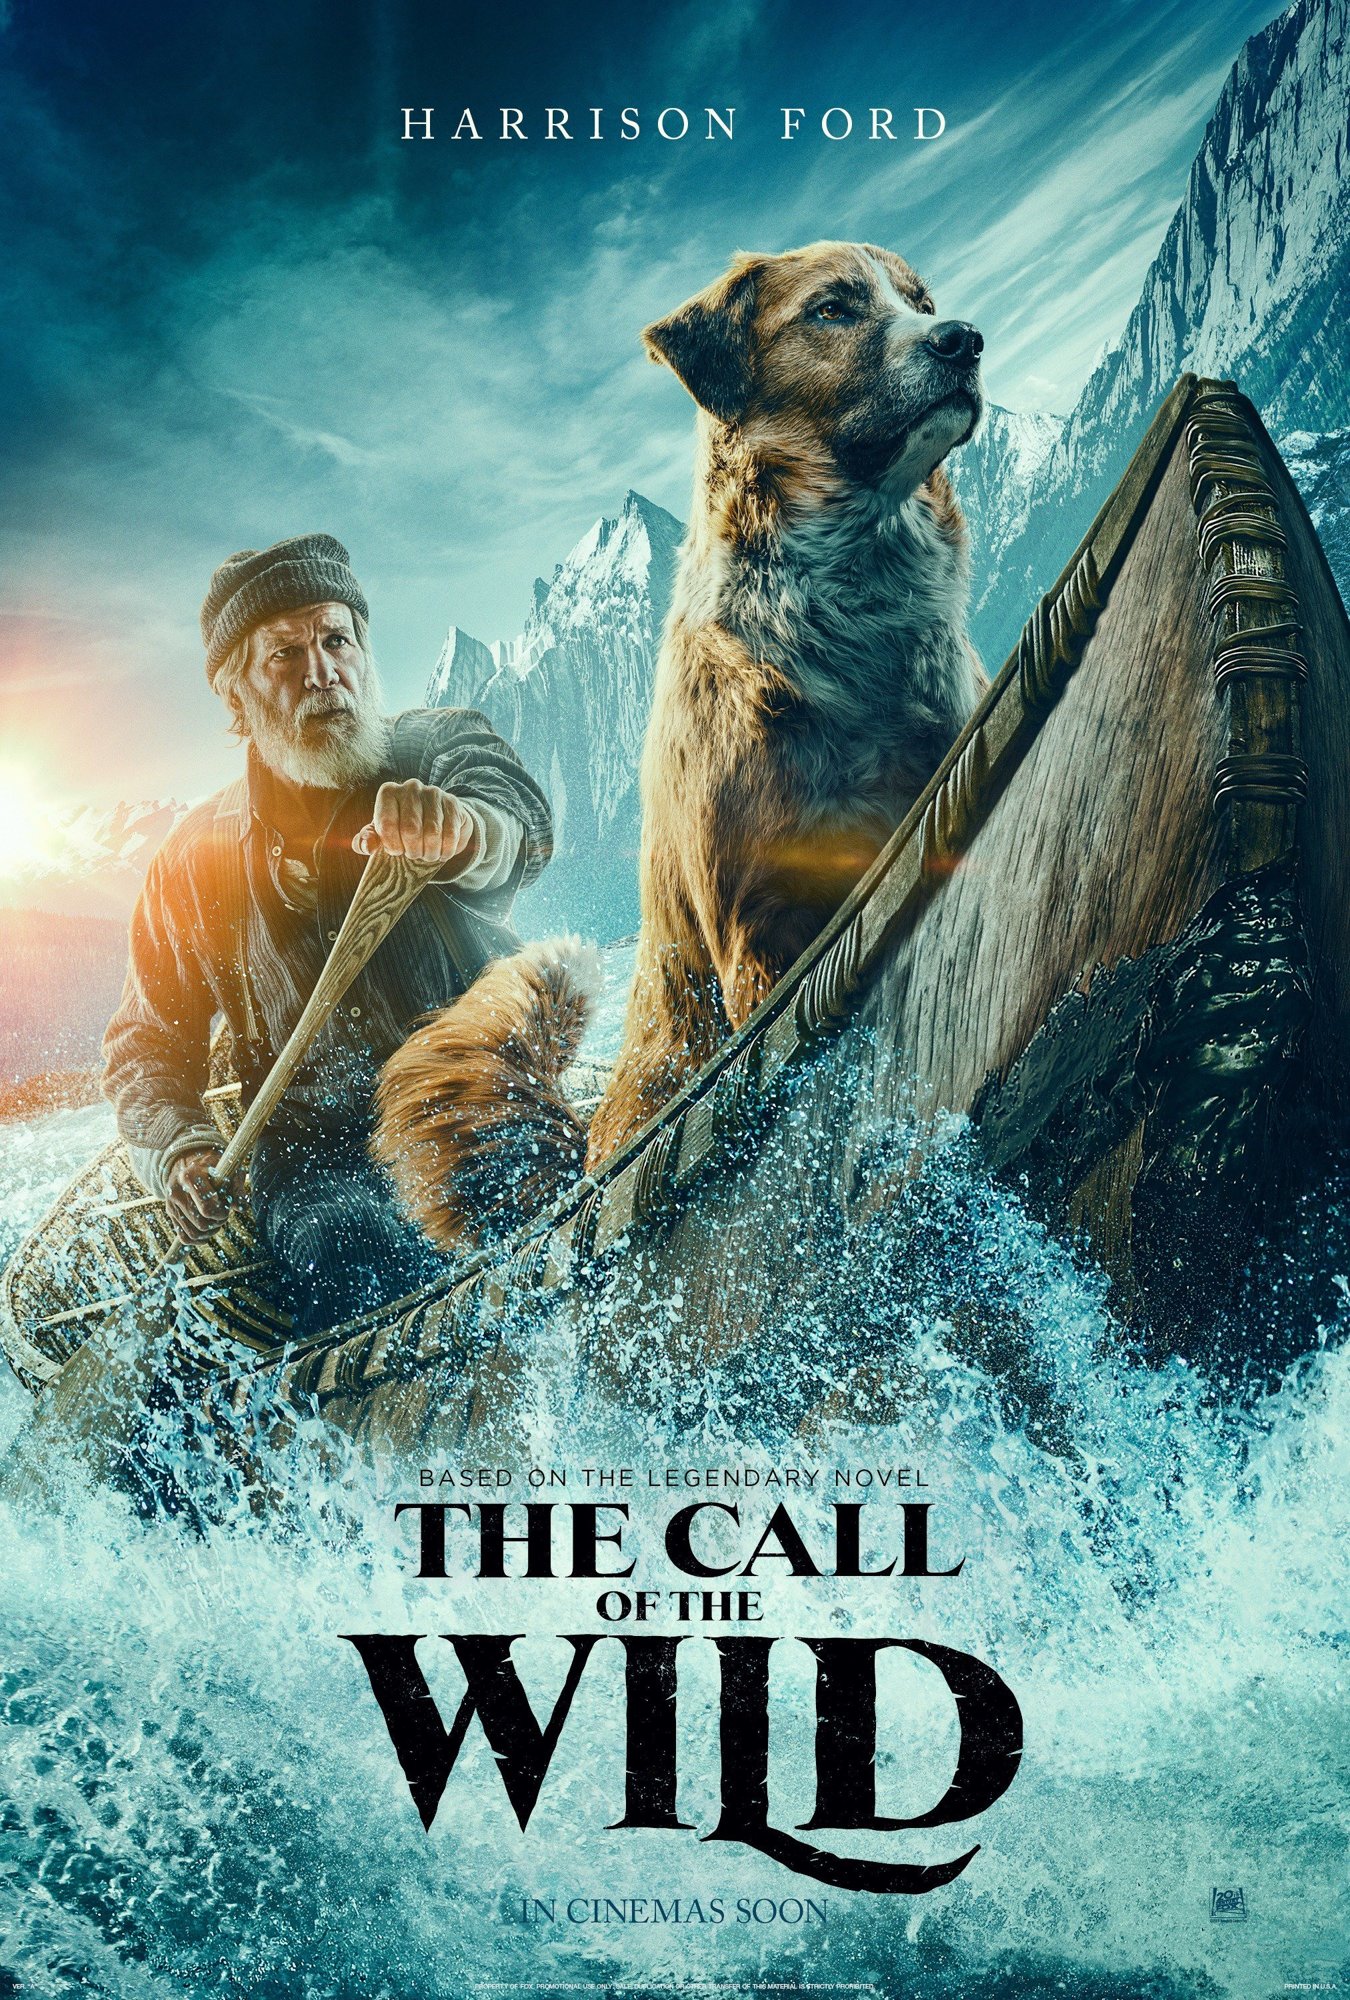 The Call of the Wild (2020) Pictures, Photo, Image and Movie Stills